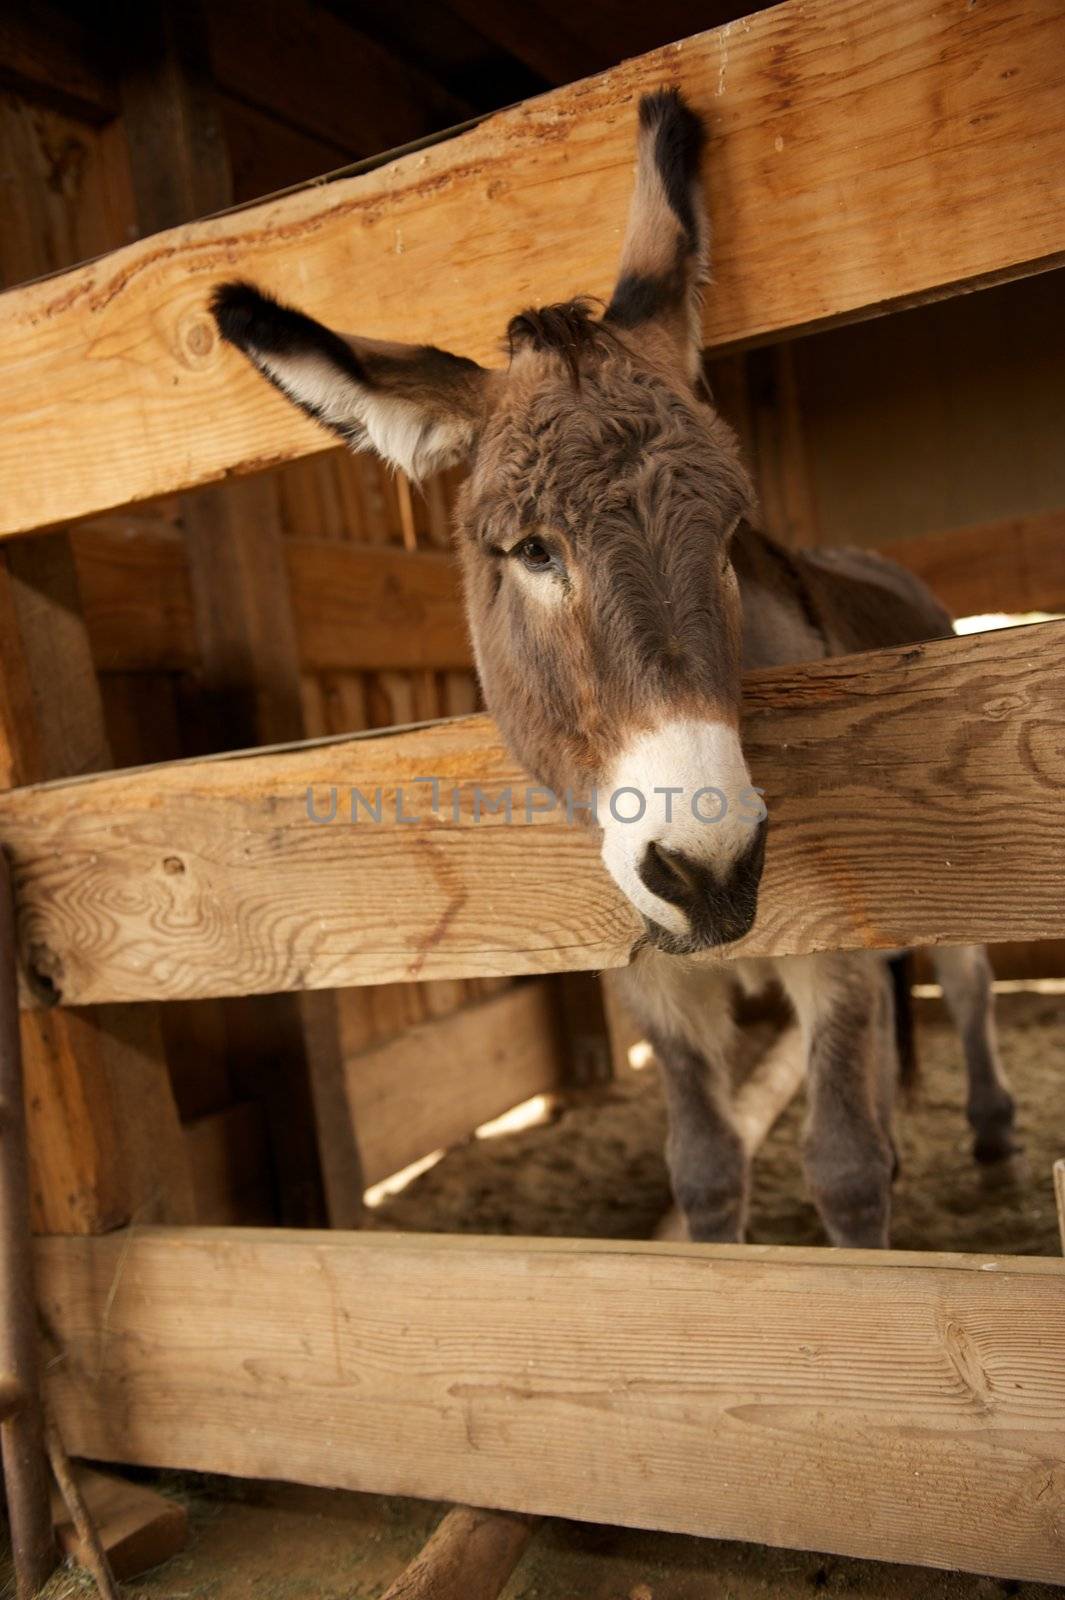 Lonely Donkey Looking Out of His Pen by pixelsnap